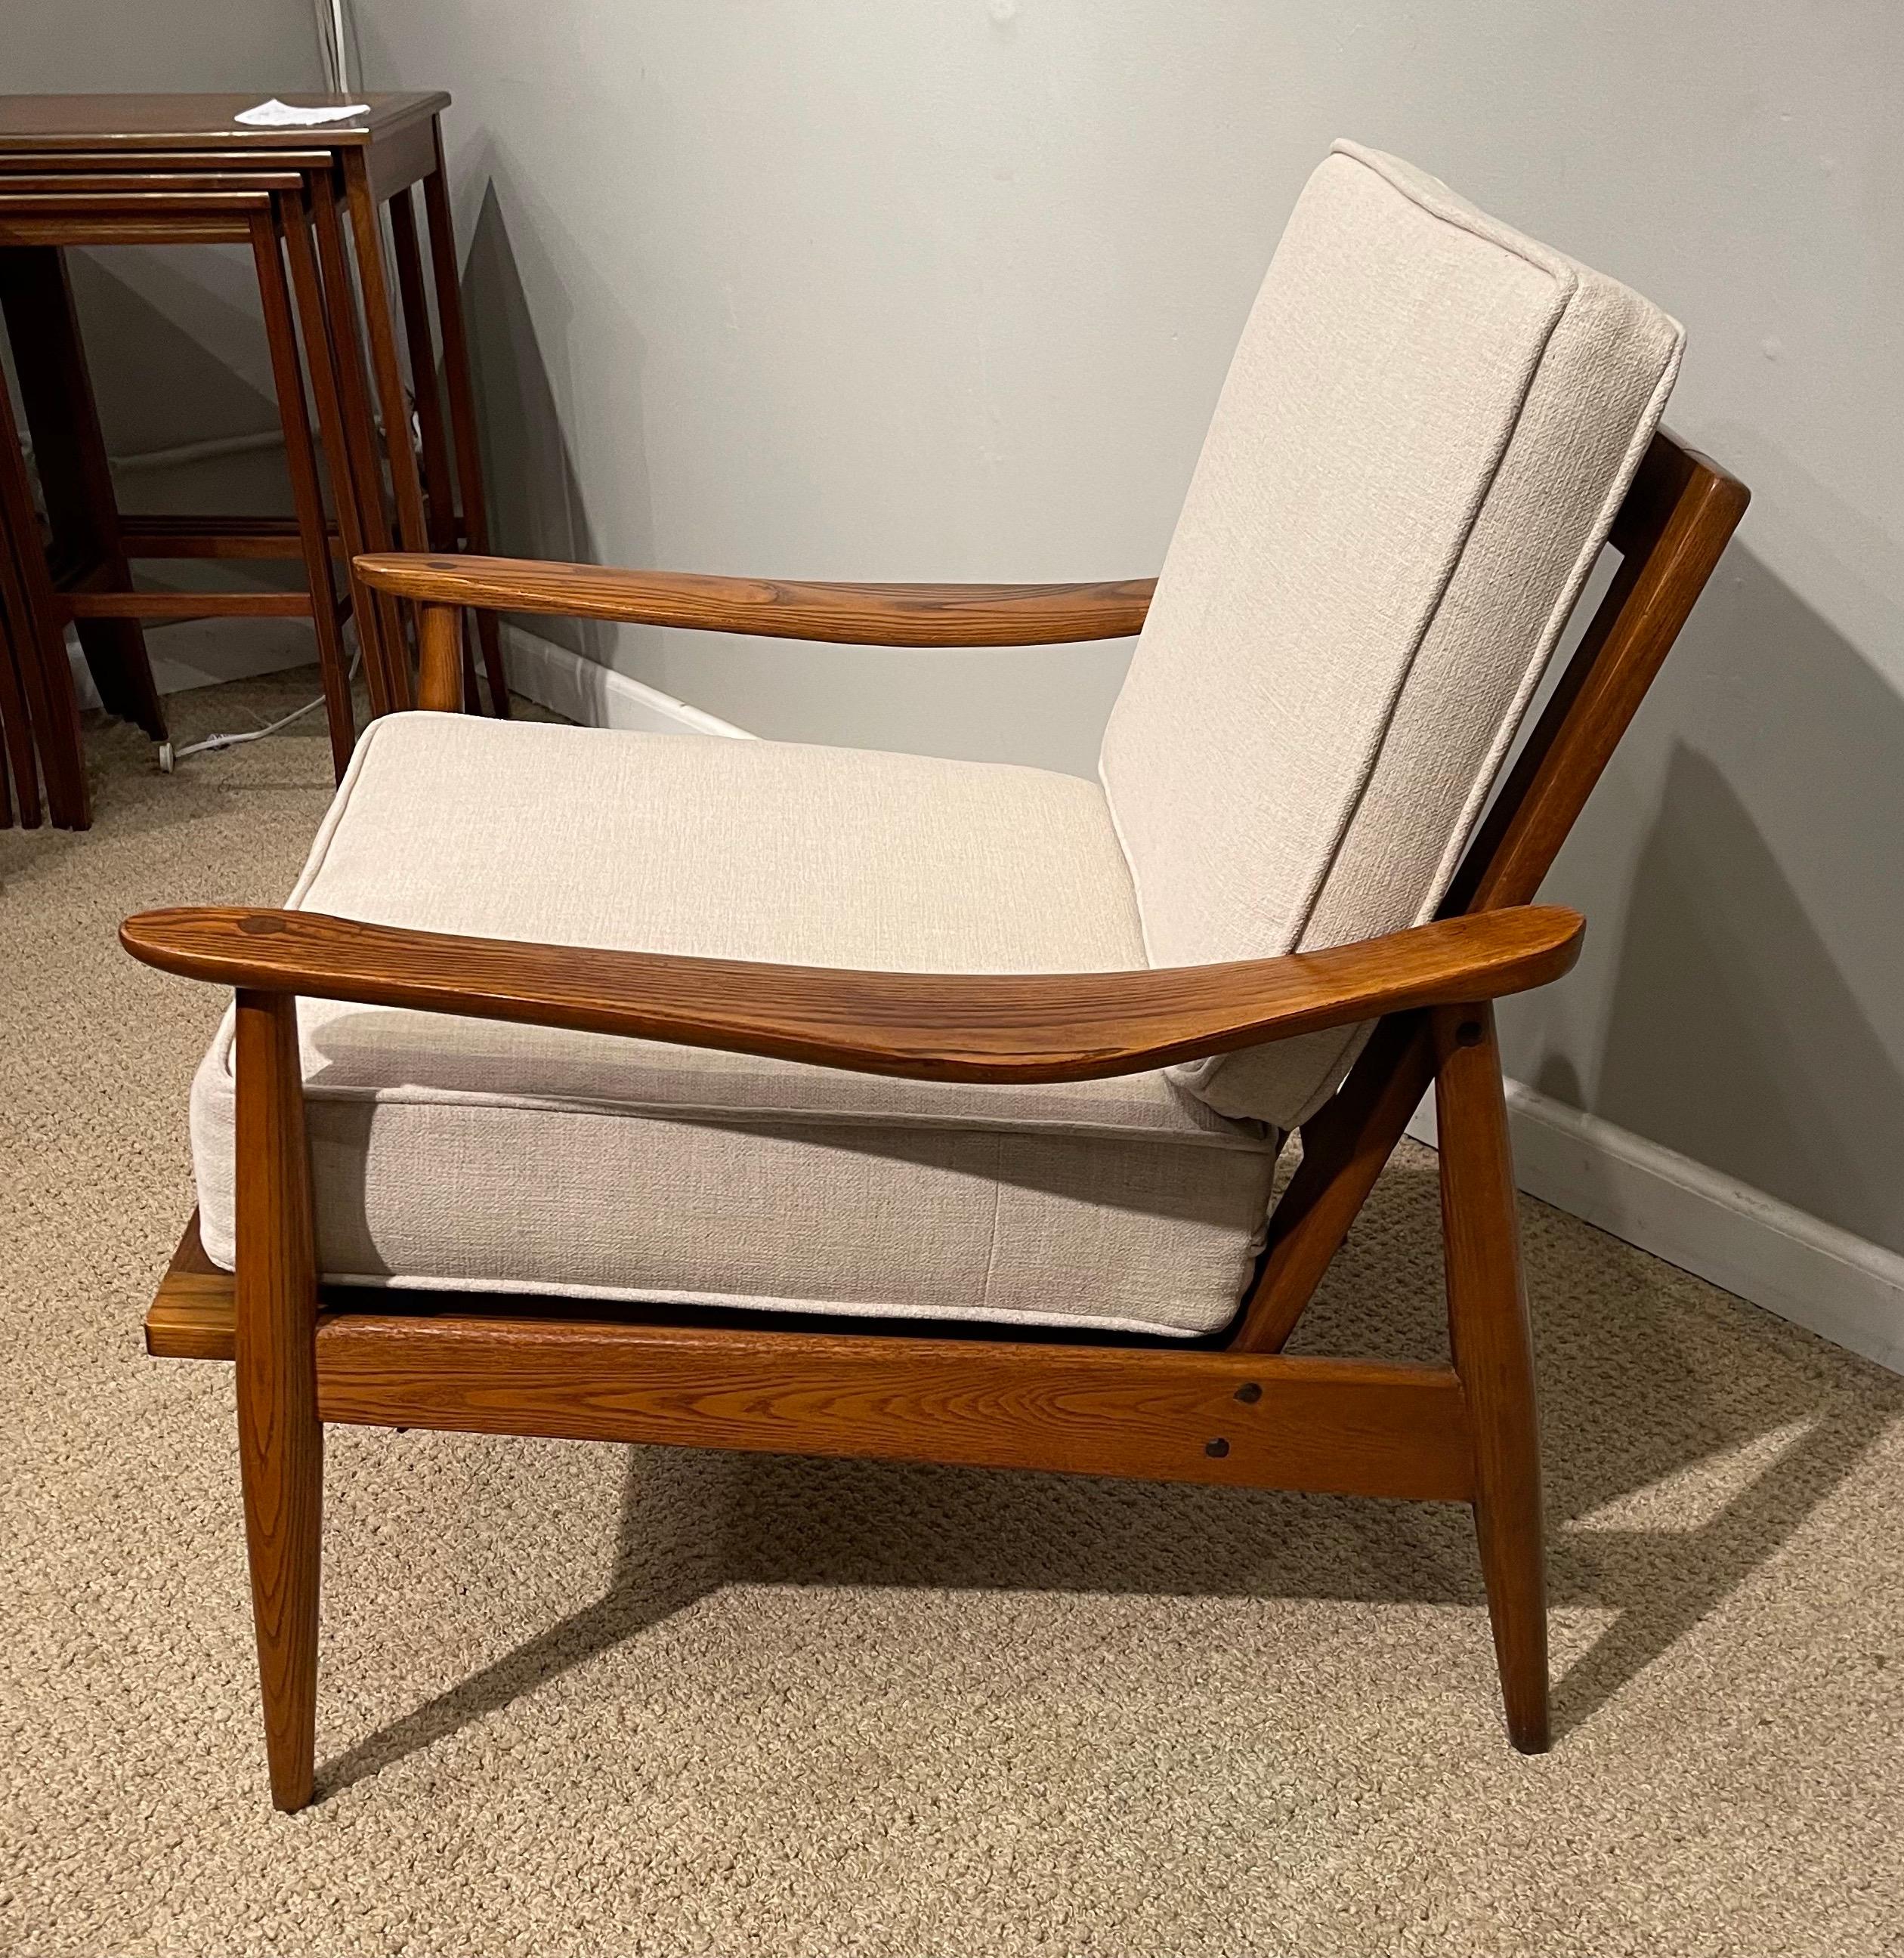 Mid-Century Modern Armchair W New Seat & Back Cushions In Good Condition For Sale In New York, NY